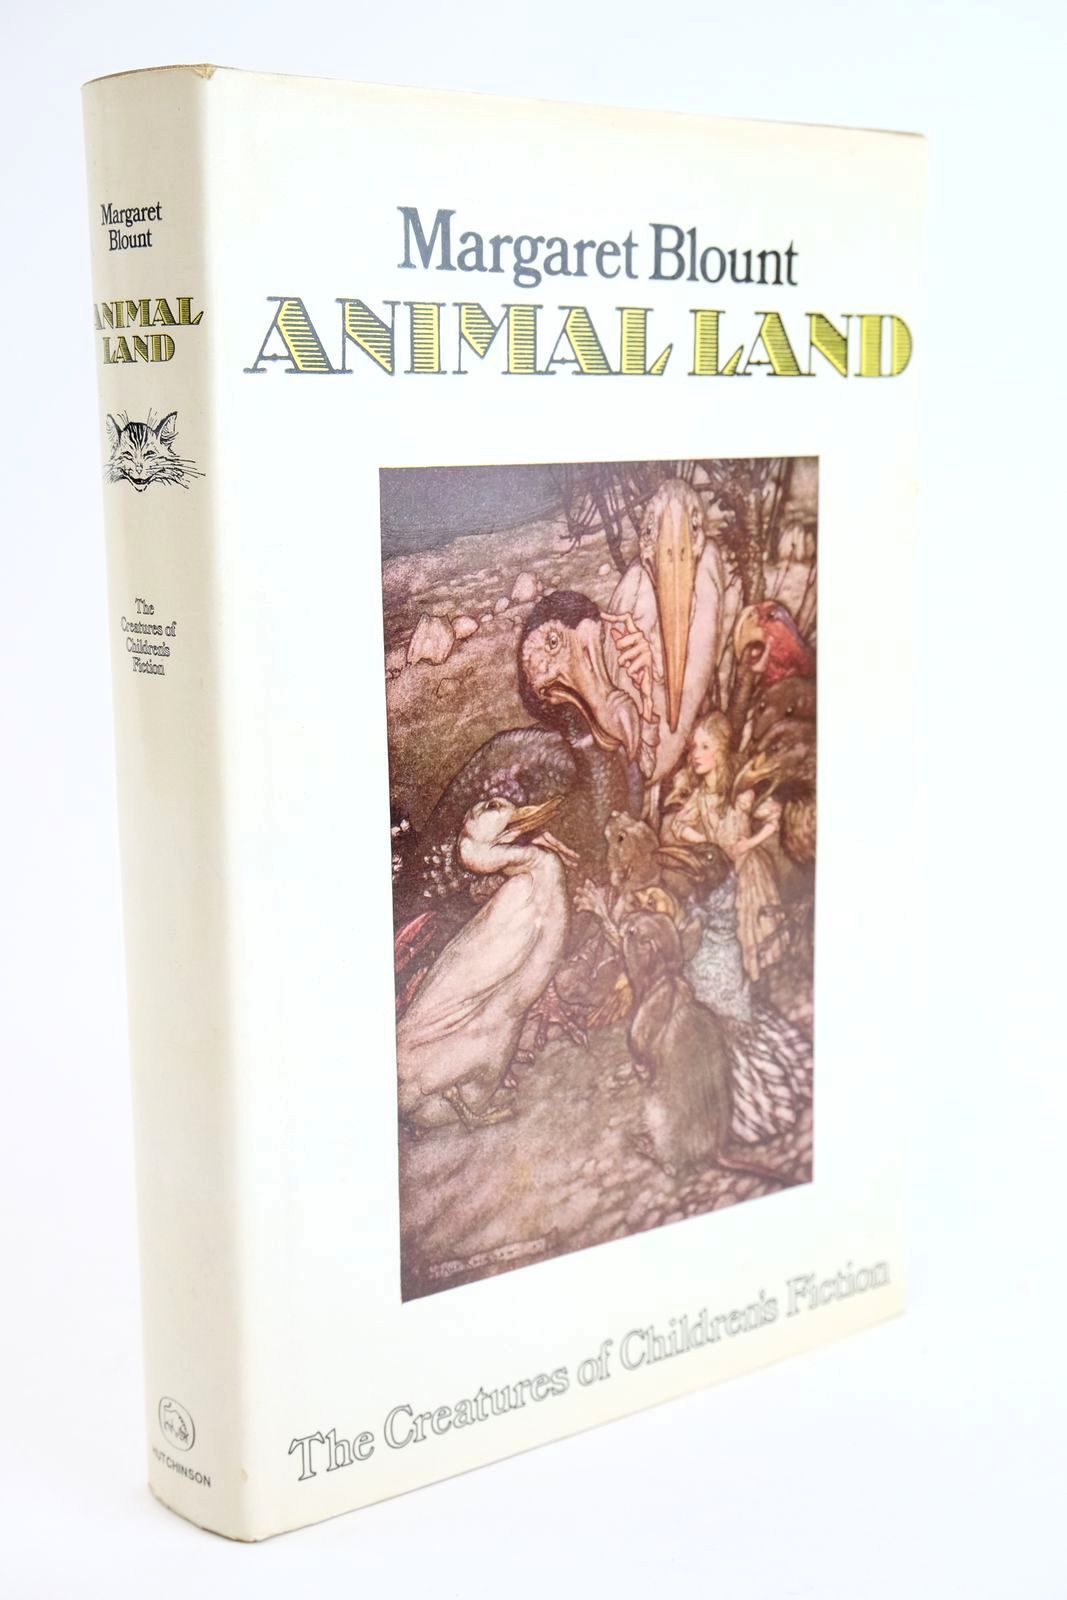 Photo of ANIMAL LAND THE CREATURES OF CHILDREN'S FICTION written by Blount, Margaret published by Hutchinson of London (STOCK CODE: 1323678)  for sale by Stella & Rose's Books